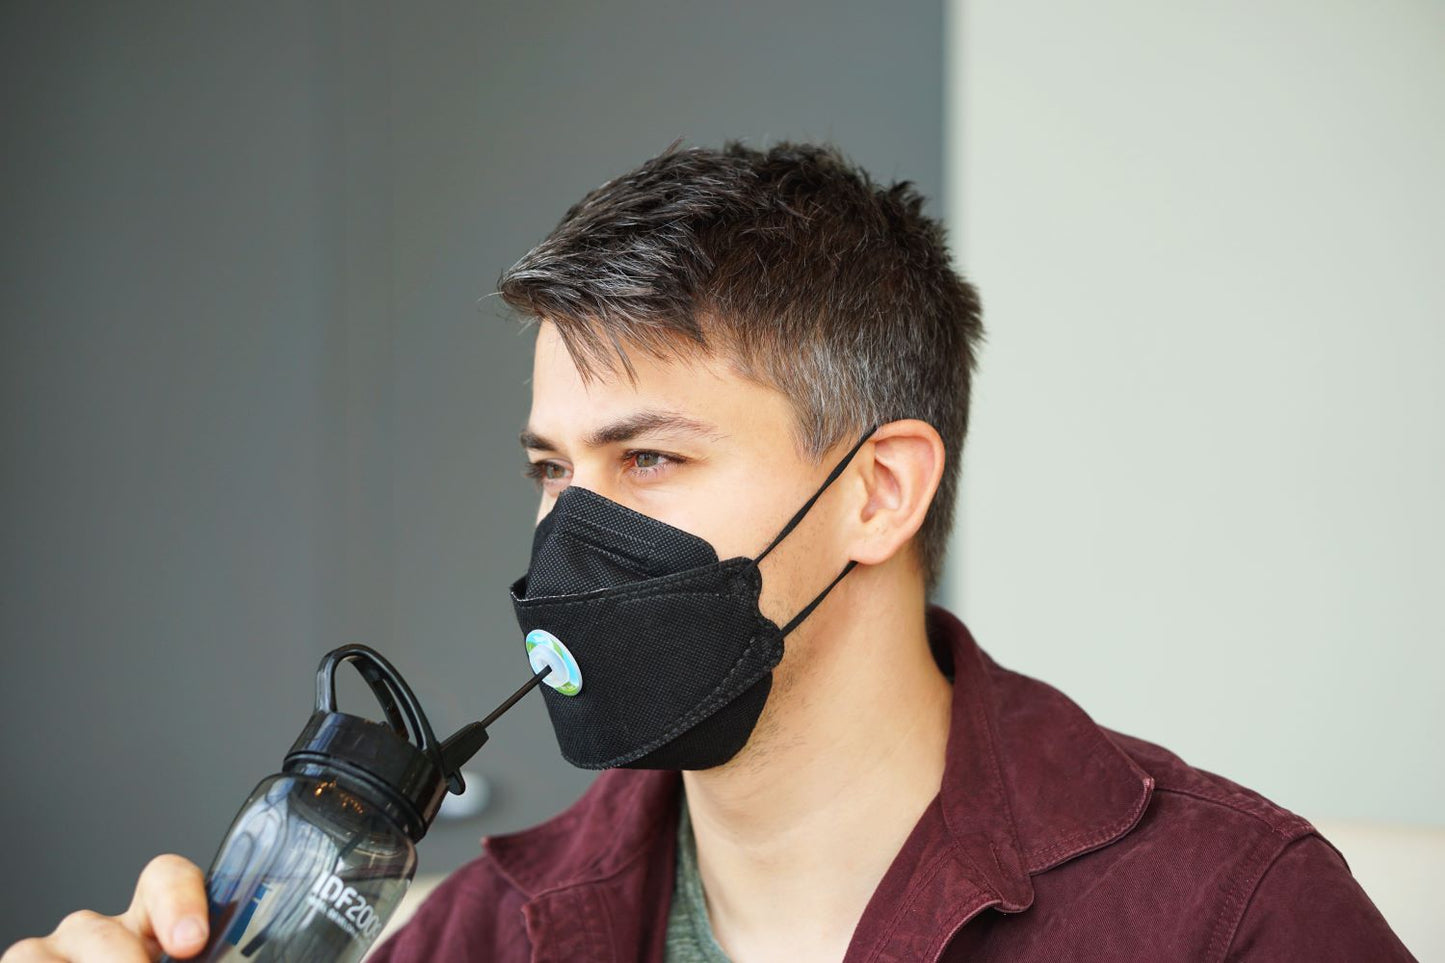 SIP Airtight Drinking Valve:  Safely drink in public spaces without removing your mask or compromising your health.  SIP is an airtight drinking valve that automatically seals after each sip.  SIP can be installed on any mask and custom fit to your mouth.